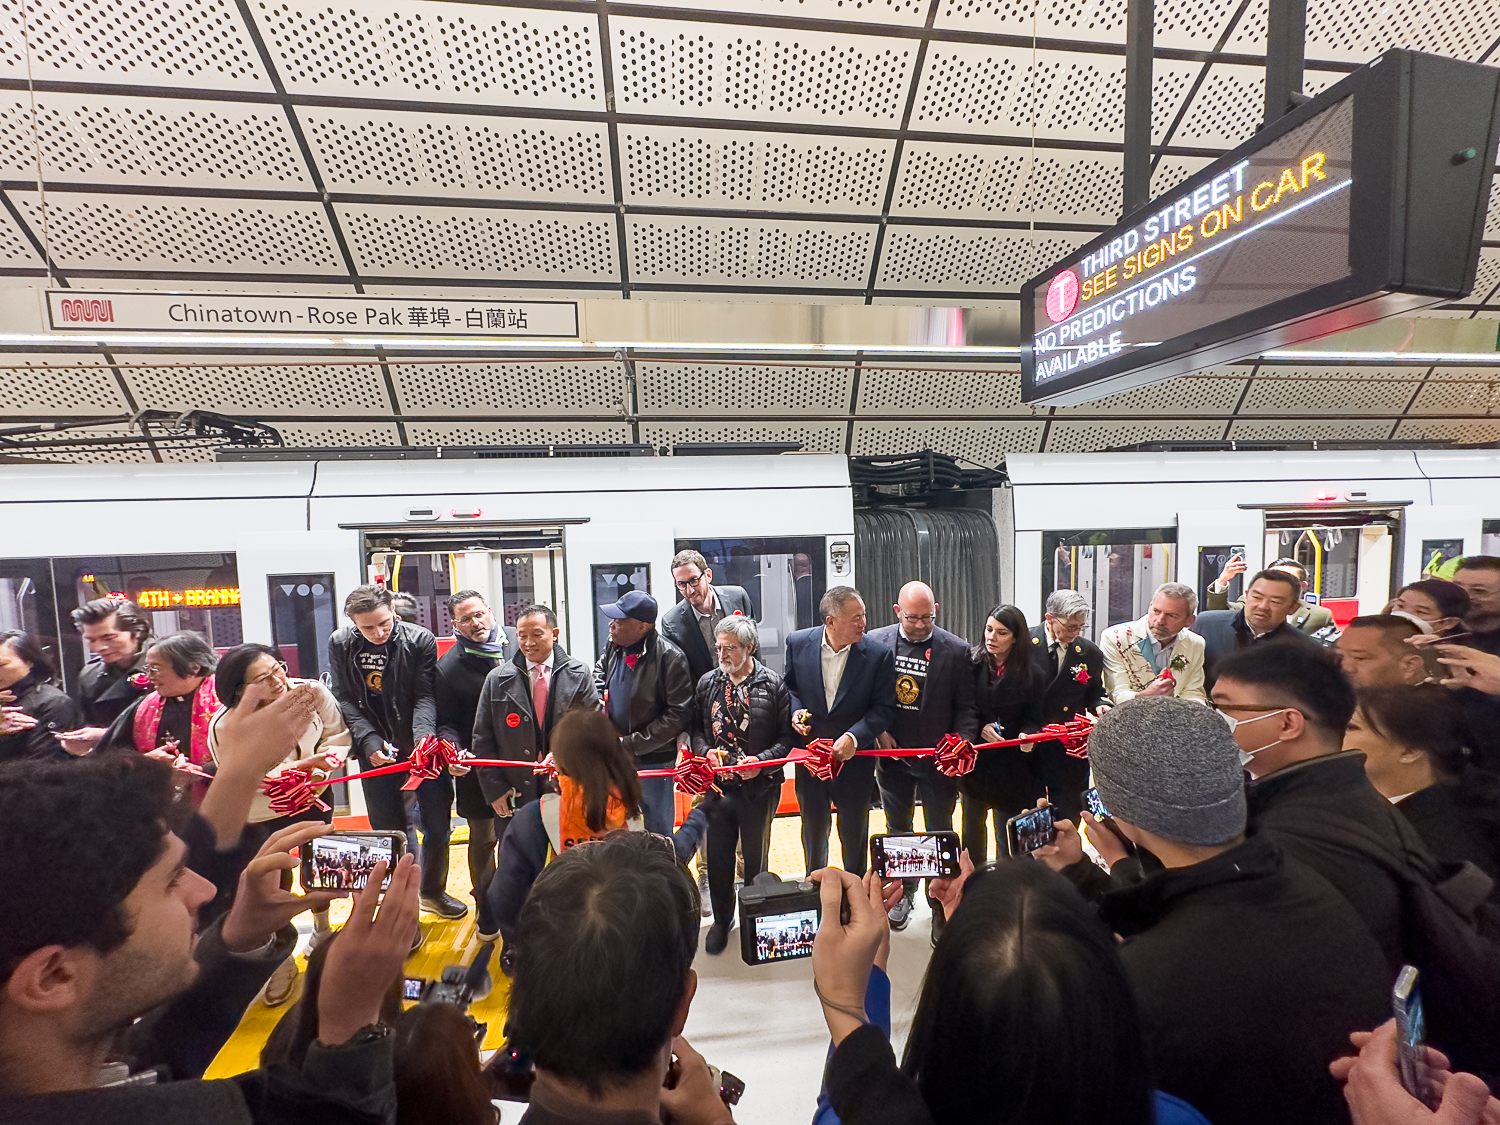 Central Subway ribbon cutting, image by author